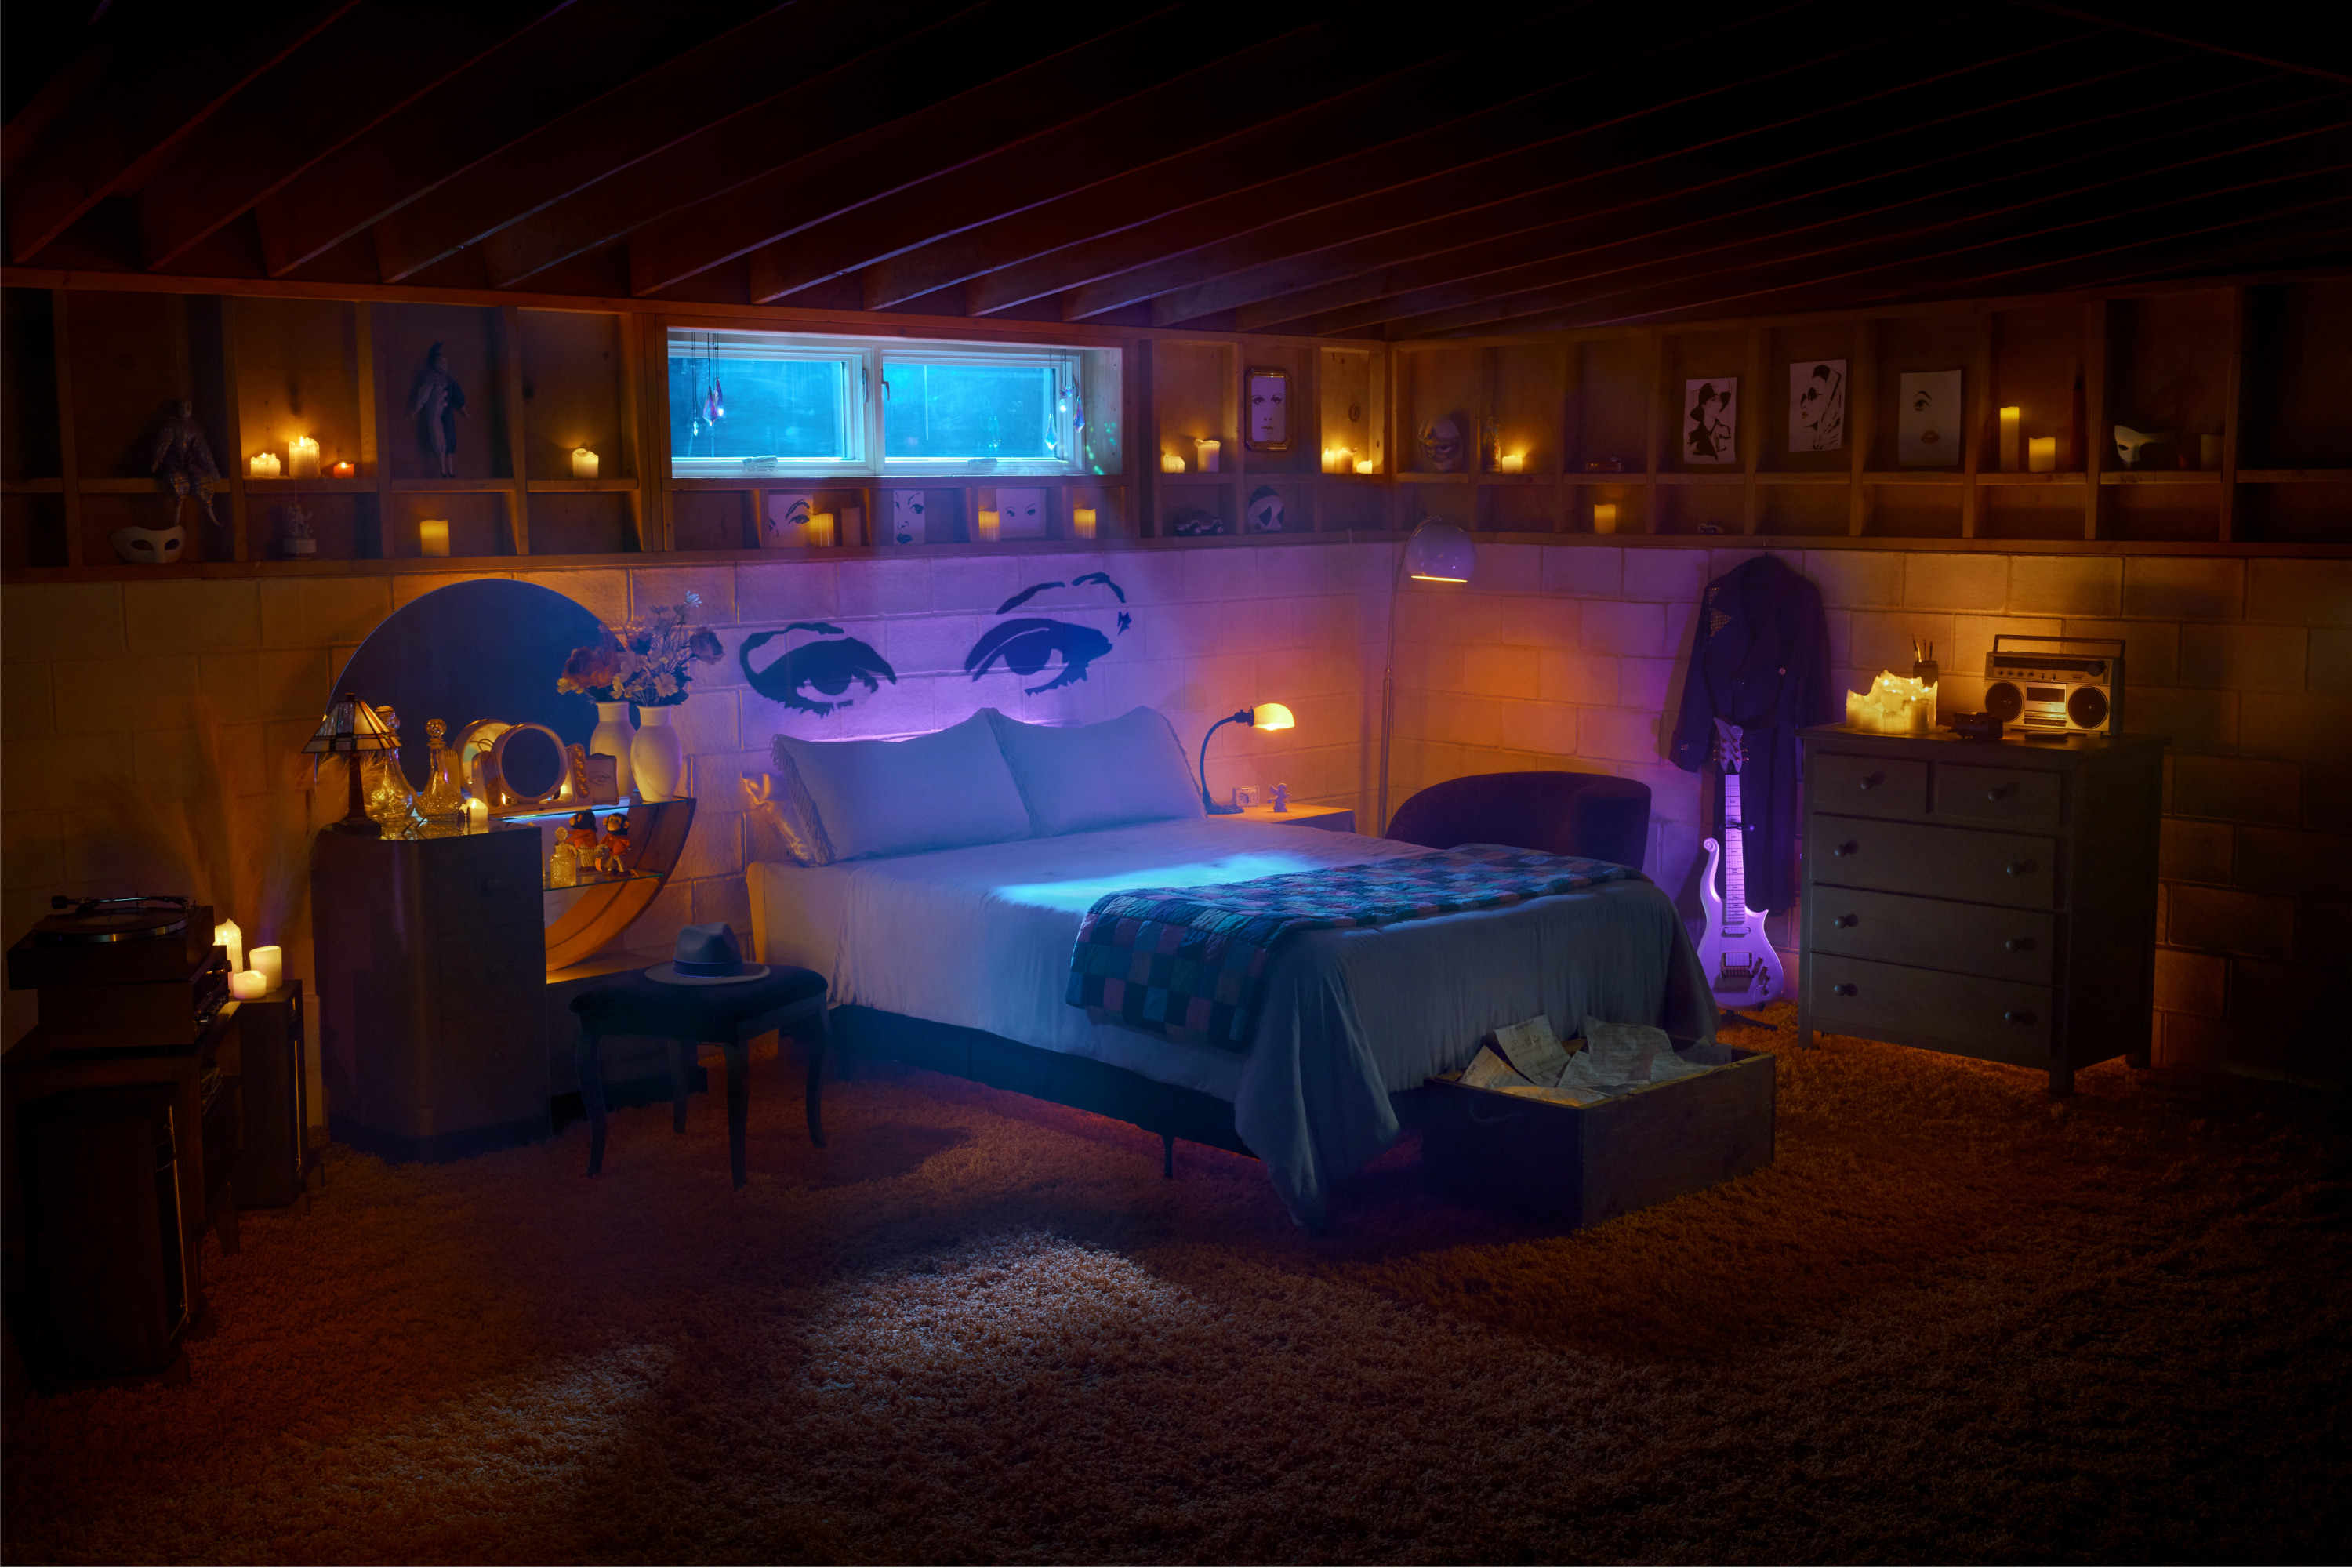 Cozy bedroom at night with lit candles, bed, furniture, and various decorations